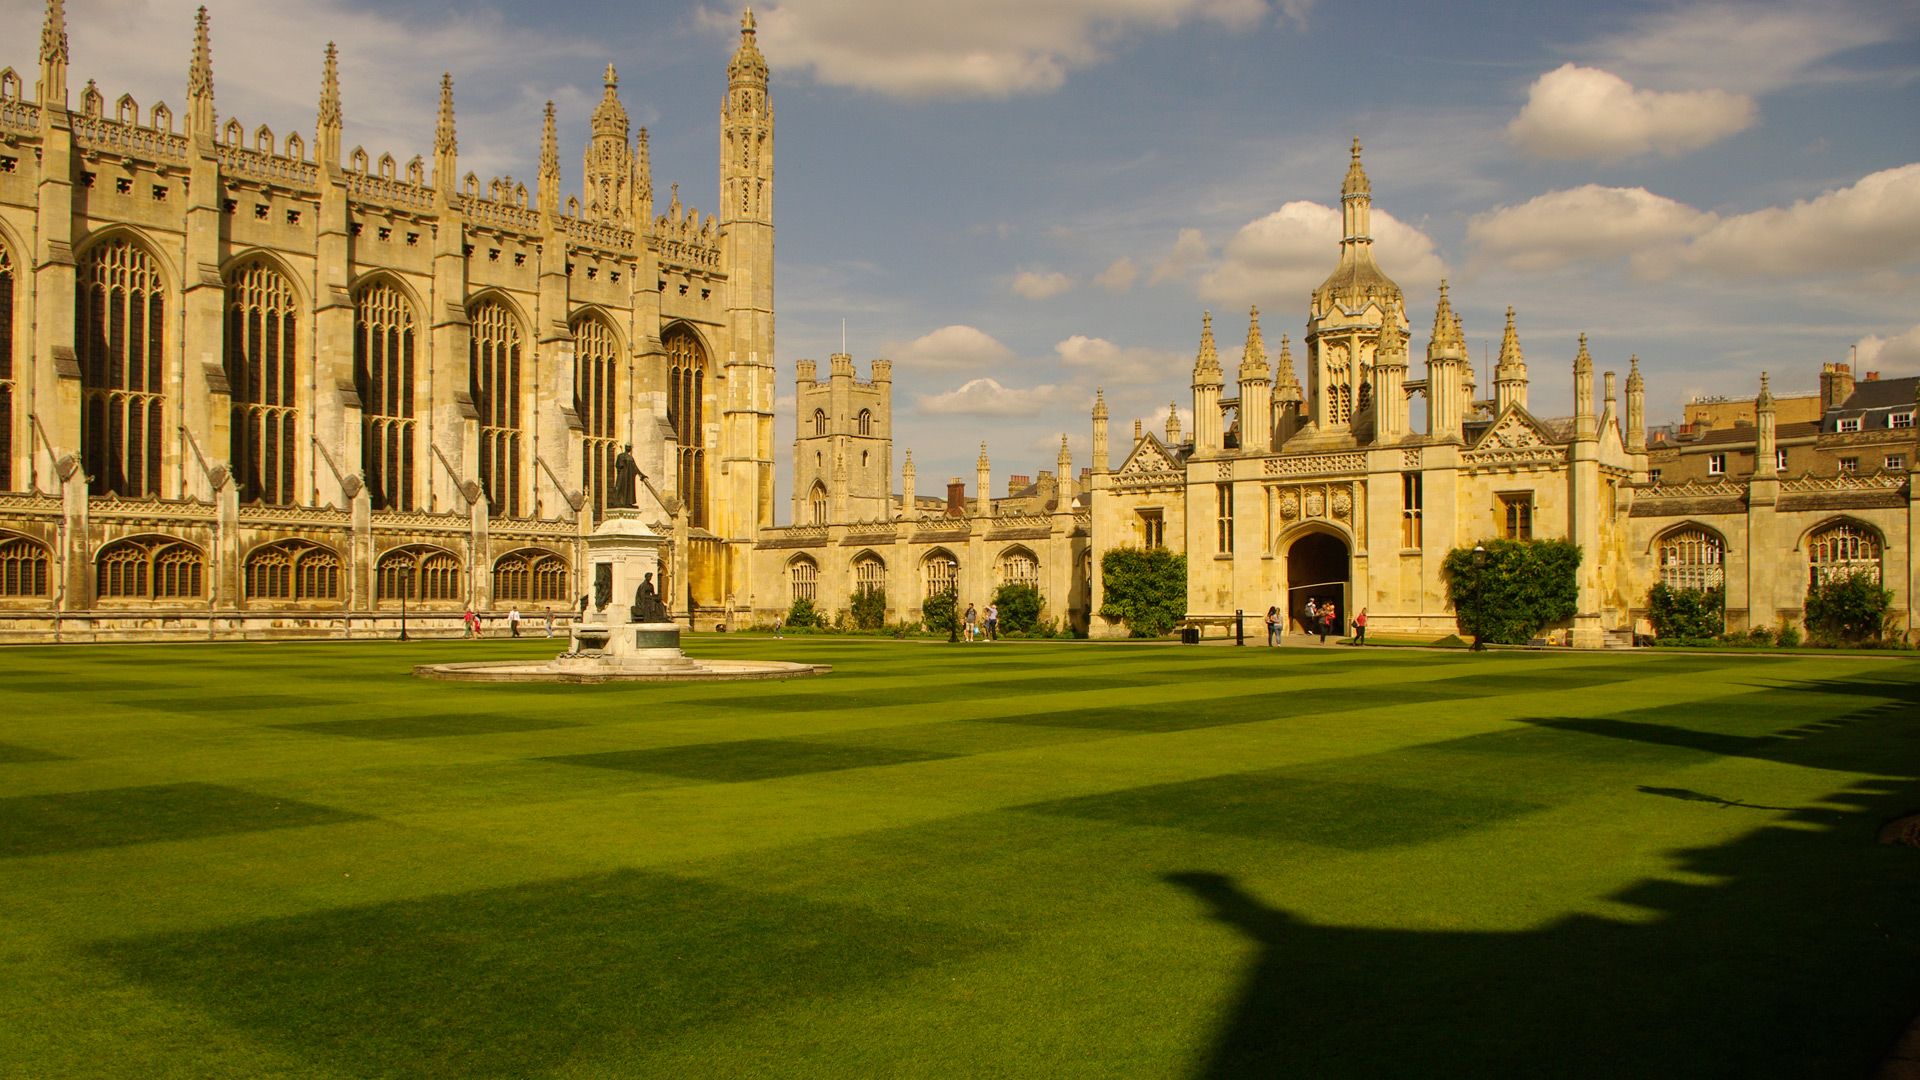 King's College Chapel and Gatehouse - Cambridge